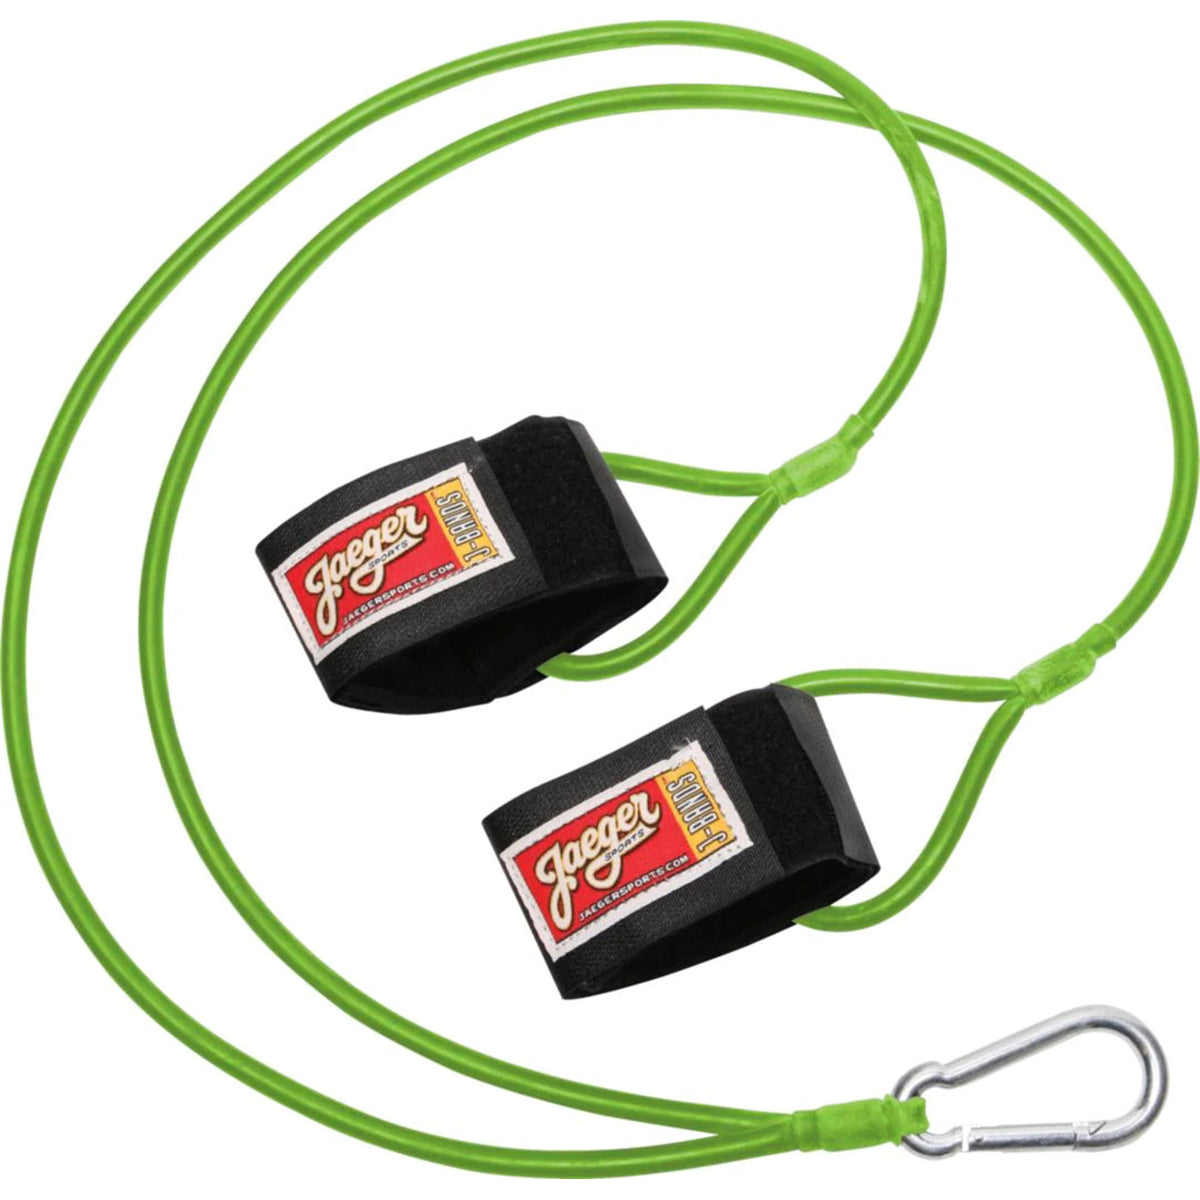 Jaeger Sports J-Bands Baseball Pitching Resistance Training Bands - Youth Jaeger Sports